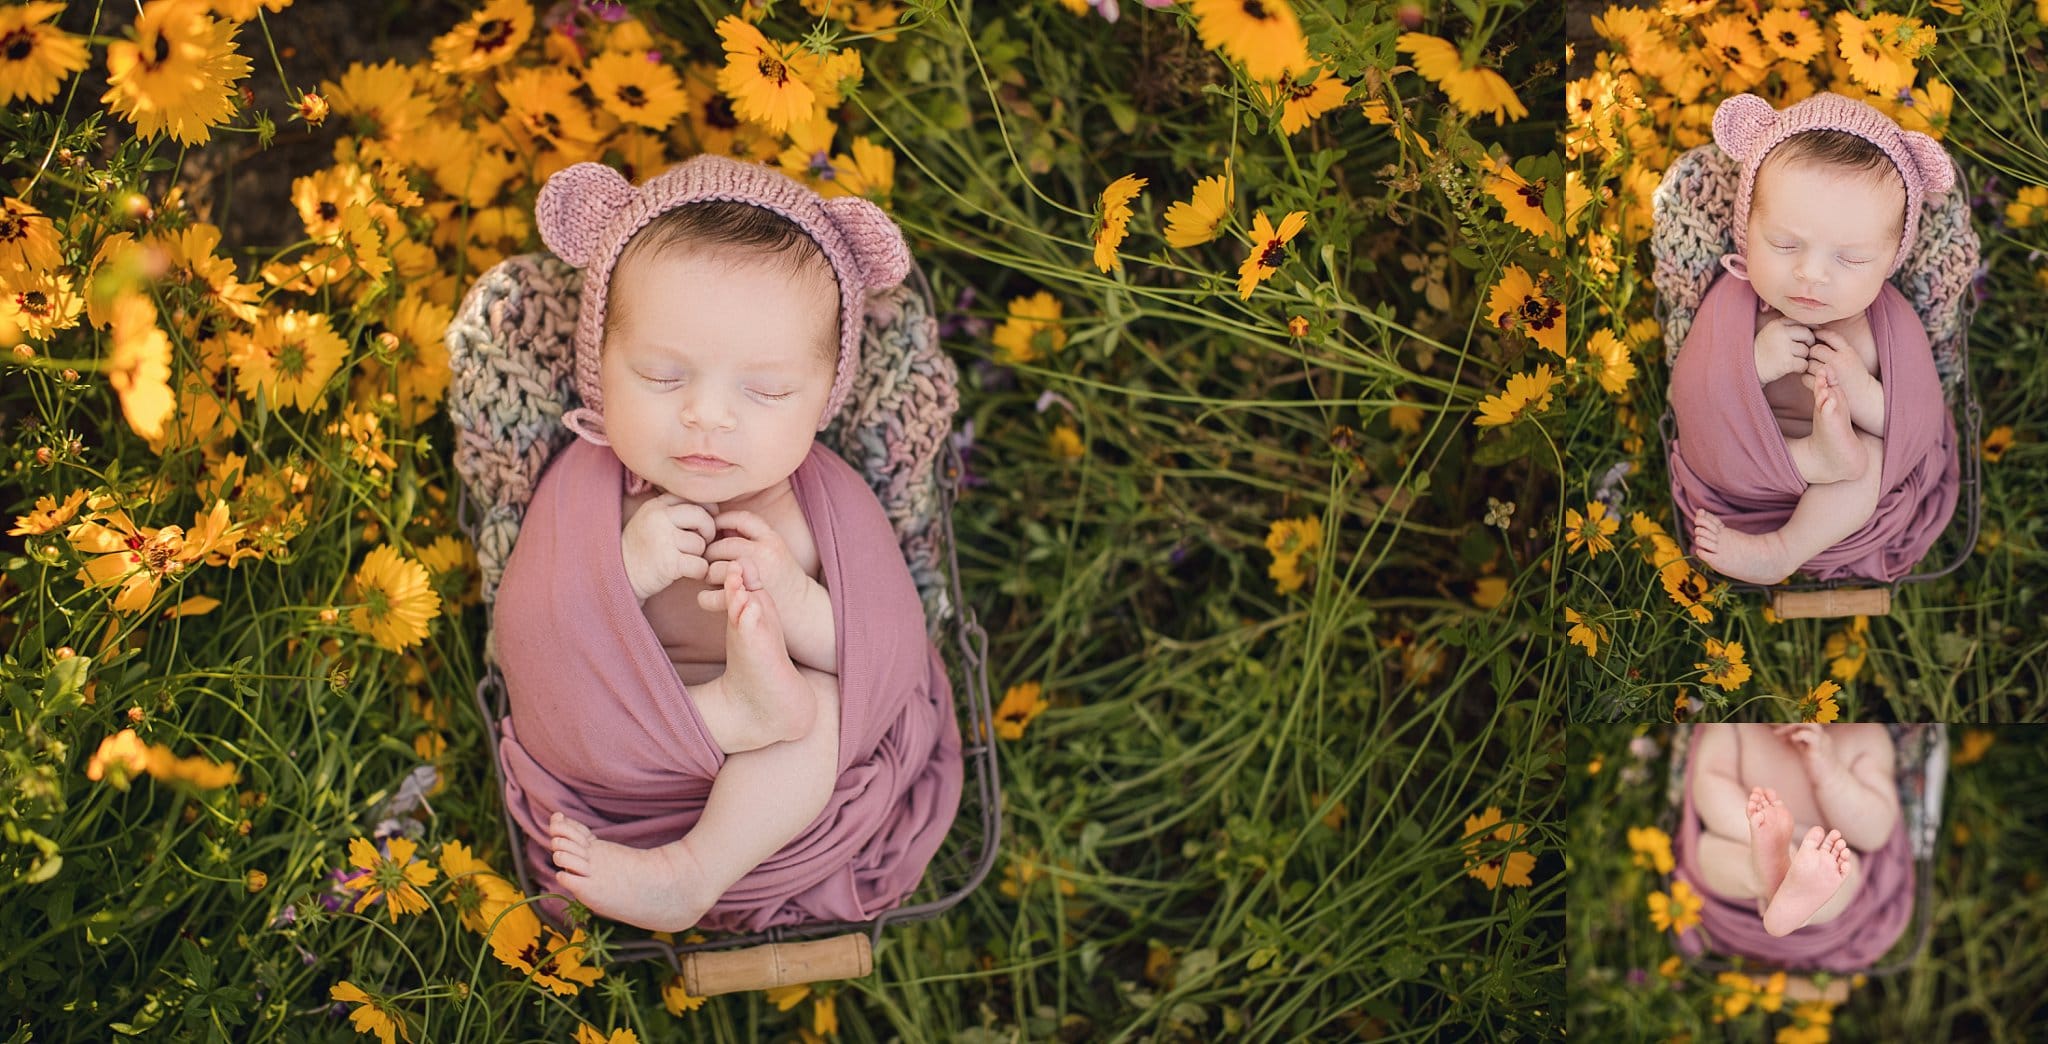 Outdoor Newborn Photographer Jacksonville Fl baby sleeping field of yellow and purple flowers mauve swaddle and teddy bear bonnet